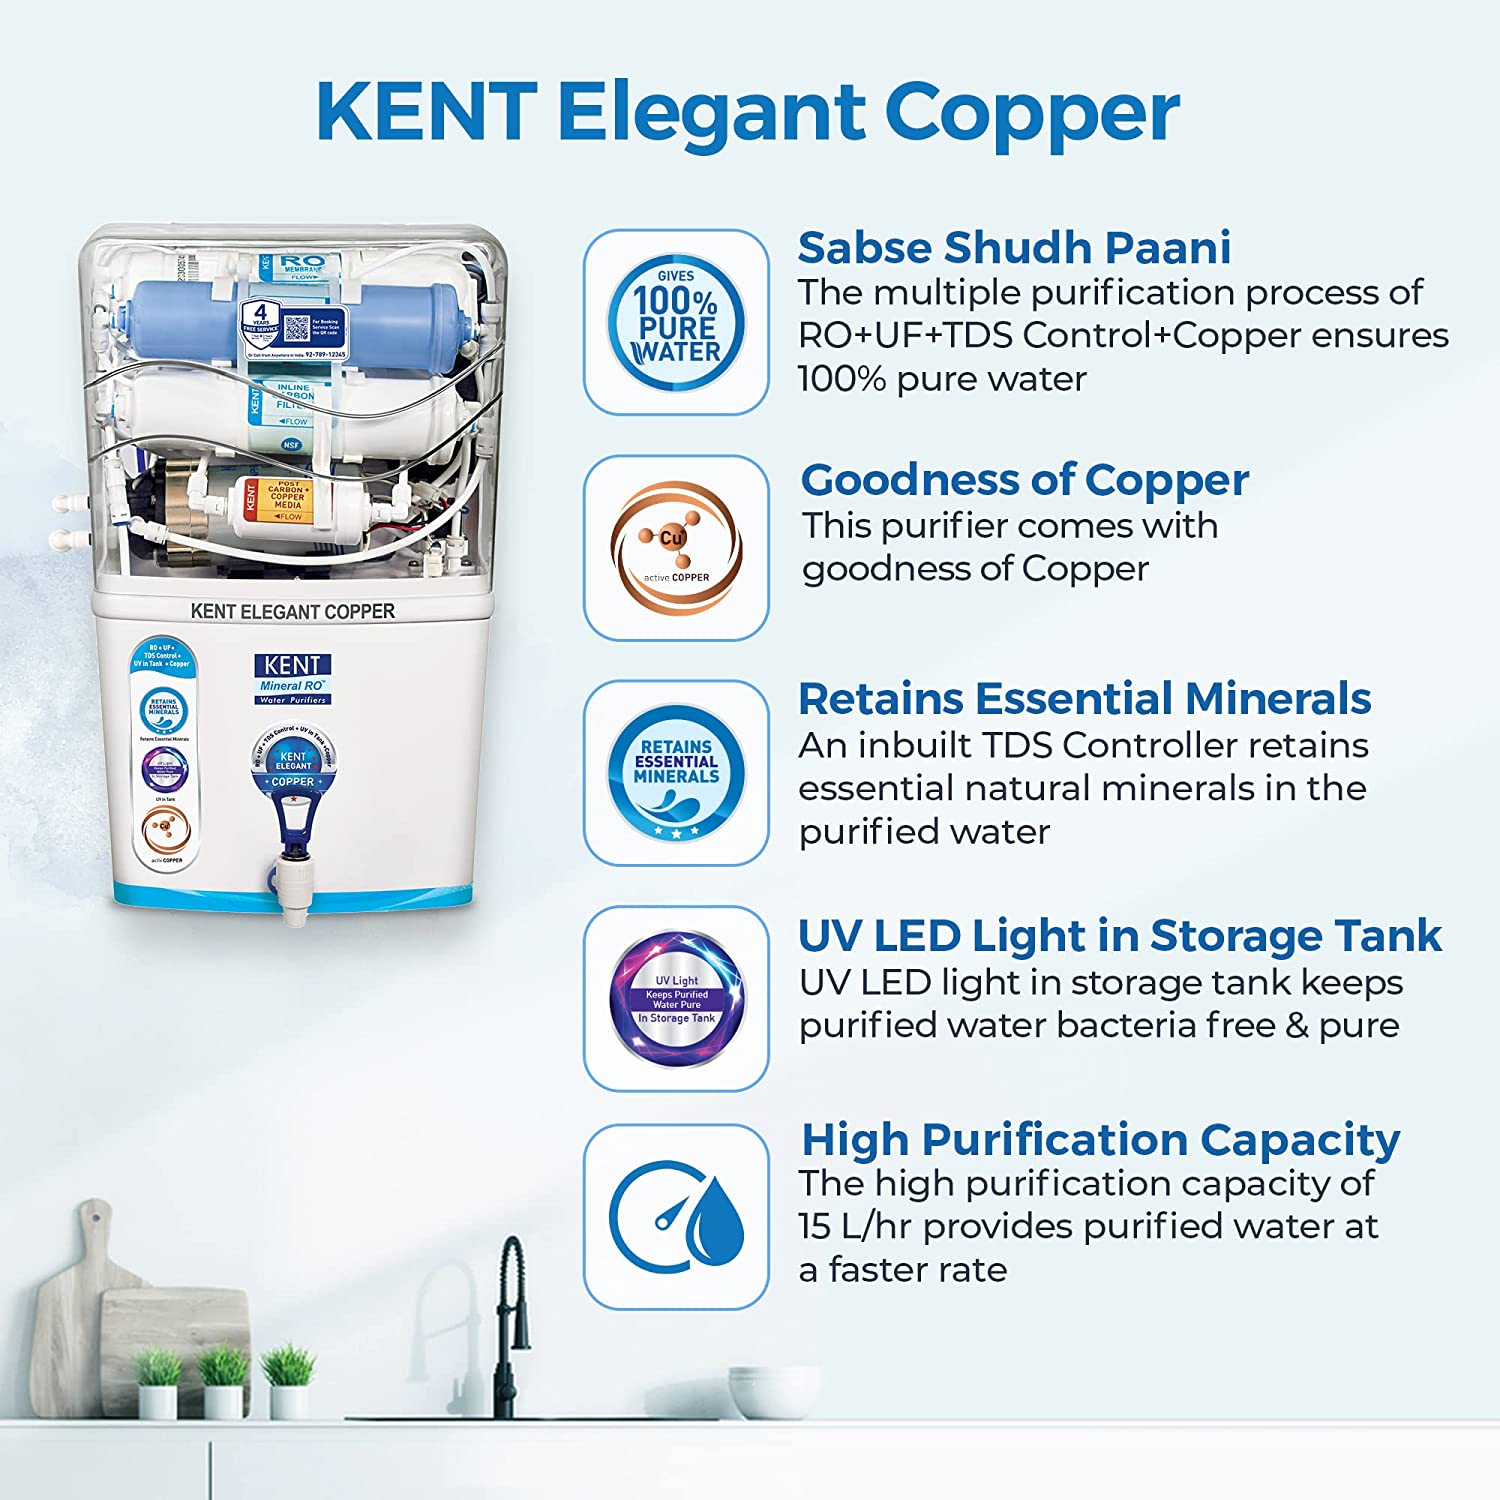 KENT Elegant Copper Compact RO+UF Water Purifier | Goodness of Copper | Patented Mineral RO Technology | RO + UF + Copper + TDS Control + UV In-tank